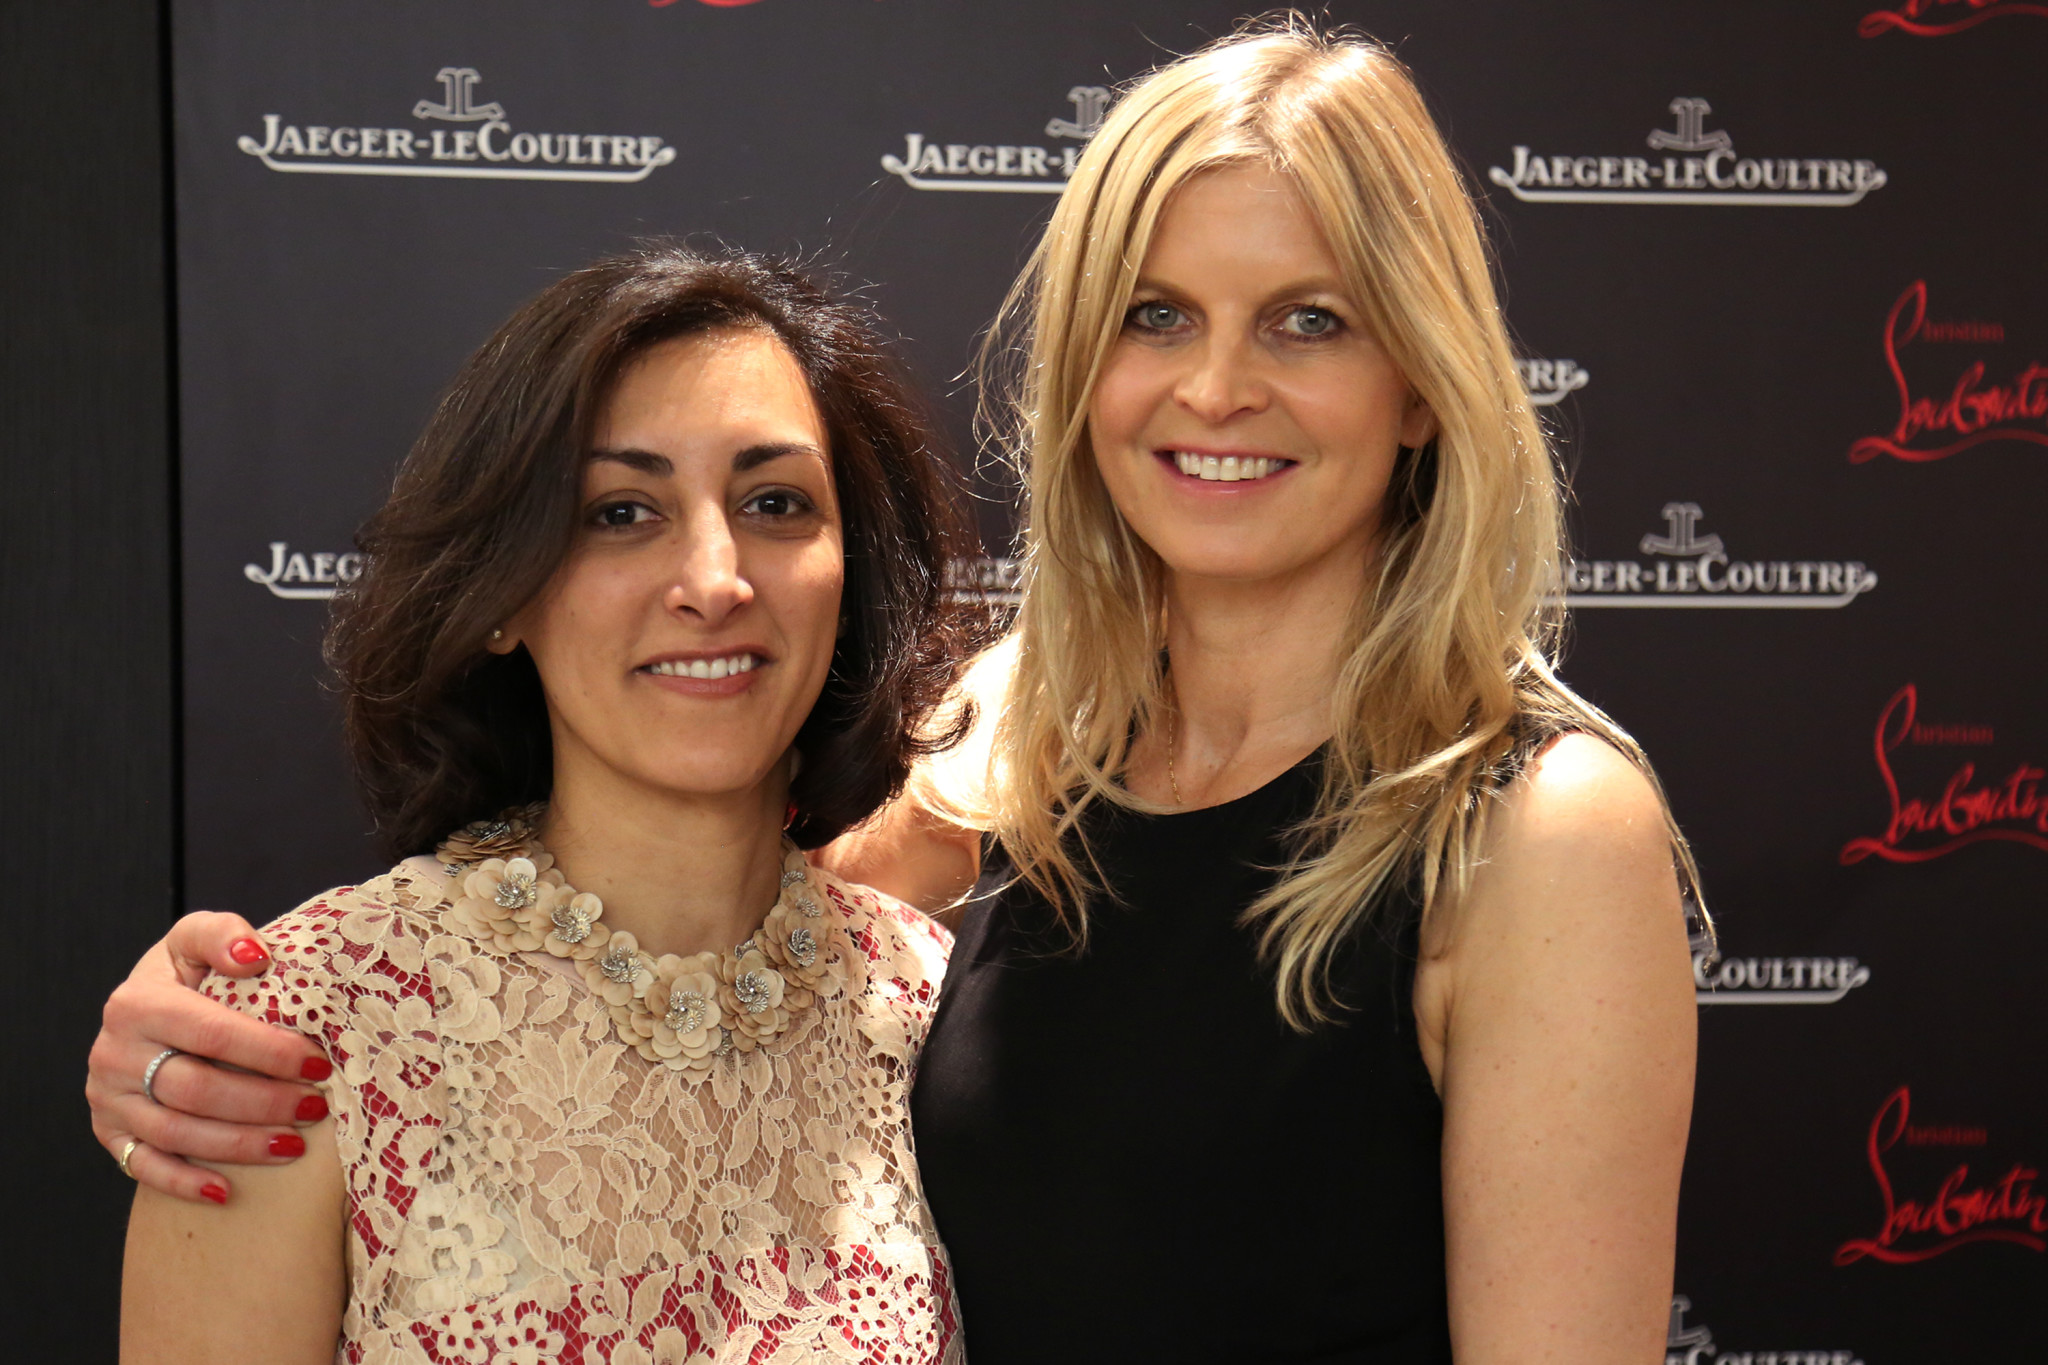 Jaeger-lecoultre jaeger lecoultre uk and global strategy director zahra kassim lakha adnd polo ambassador clare milford haven